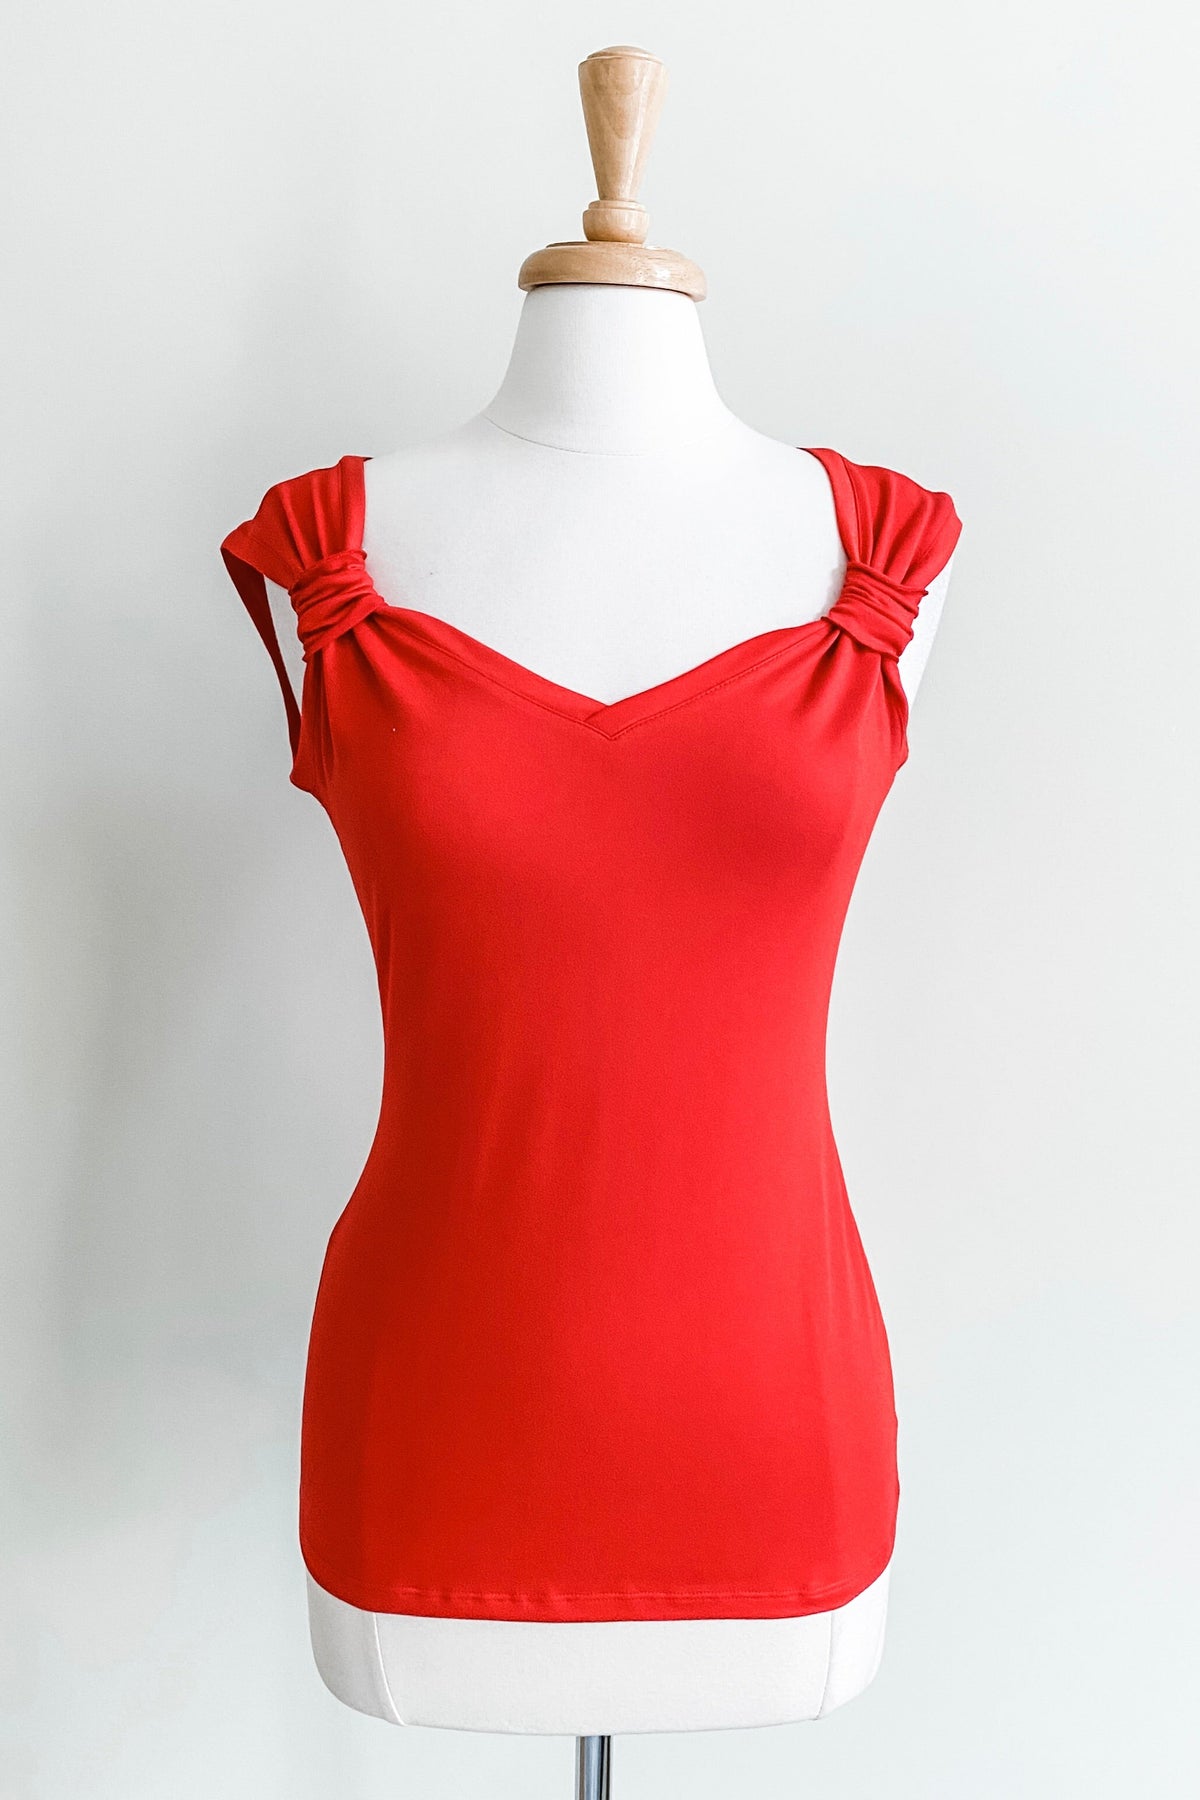 Convertible Cami Top in Fire Red